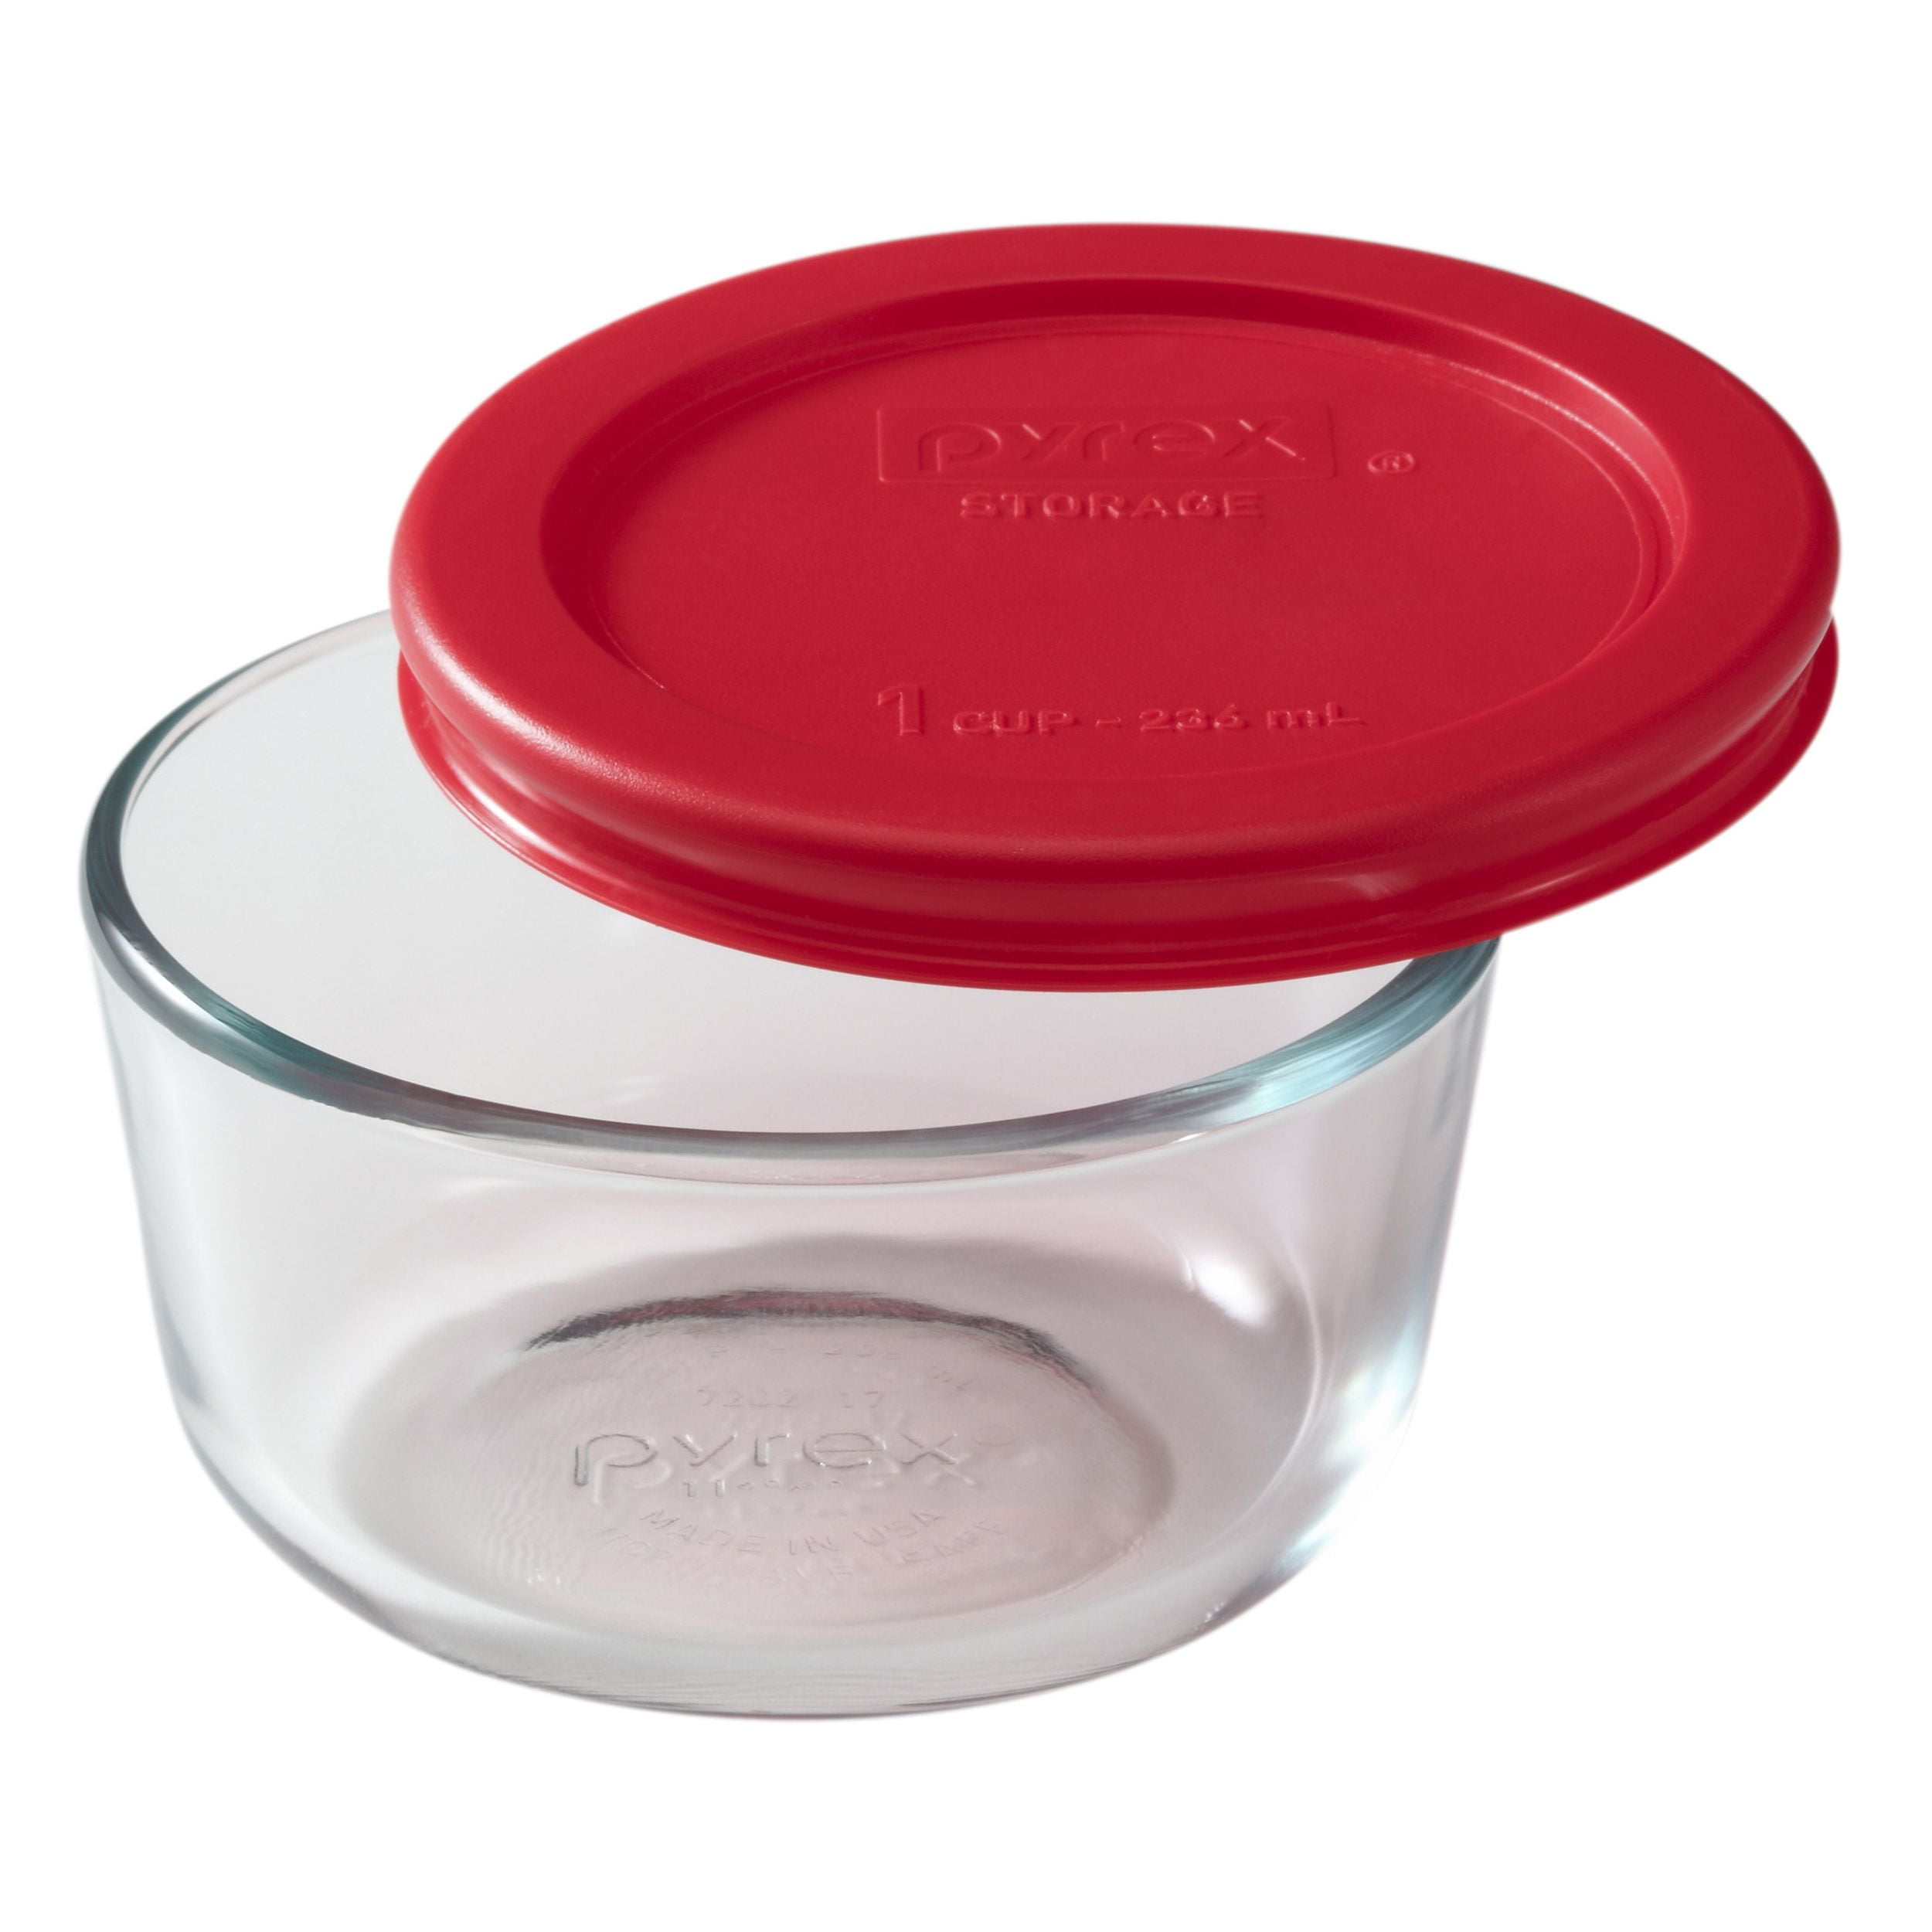 Storage Plus 6-Piece Round Glass Container Set with Lids (Red